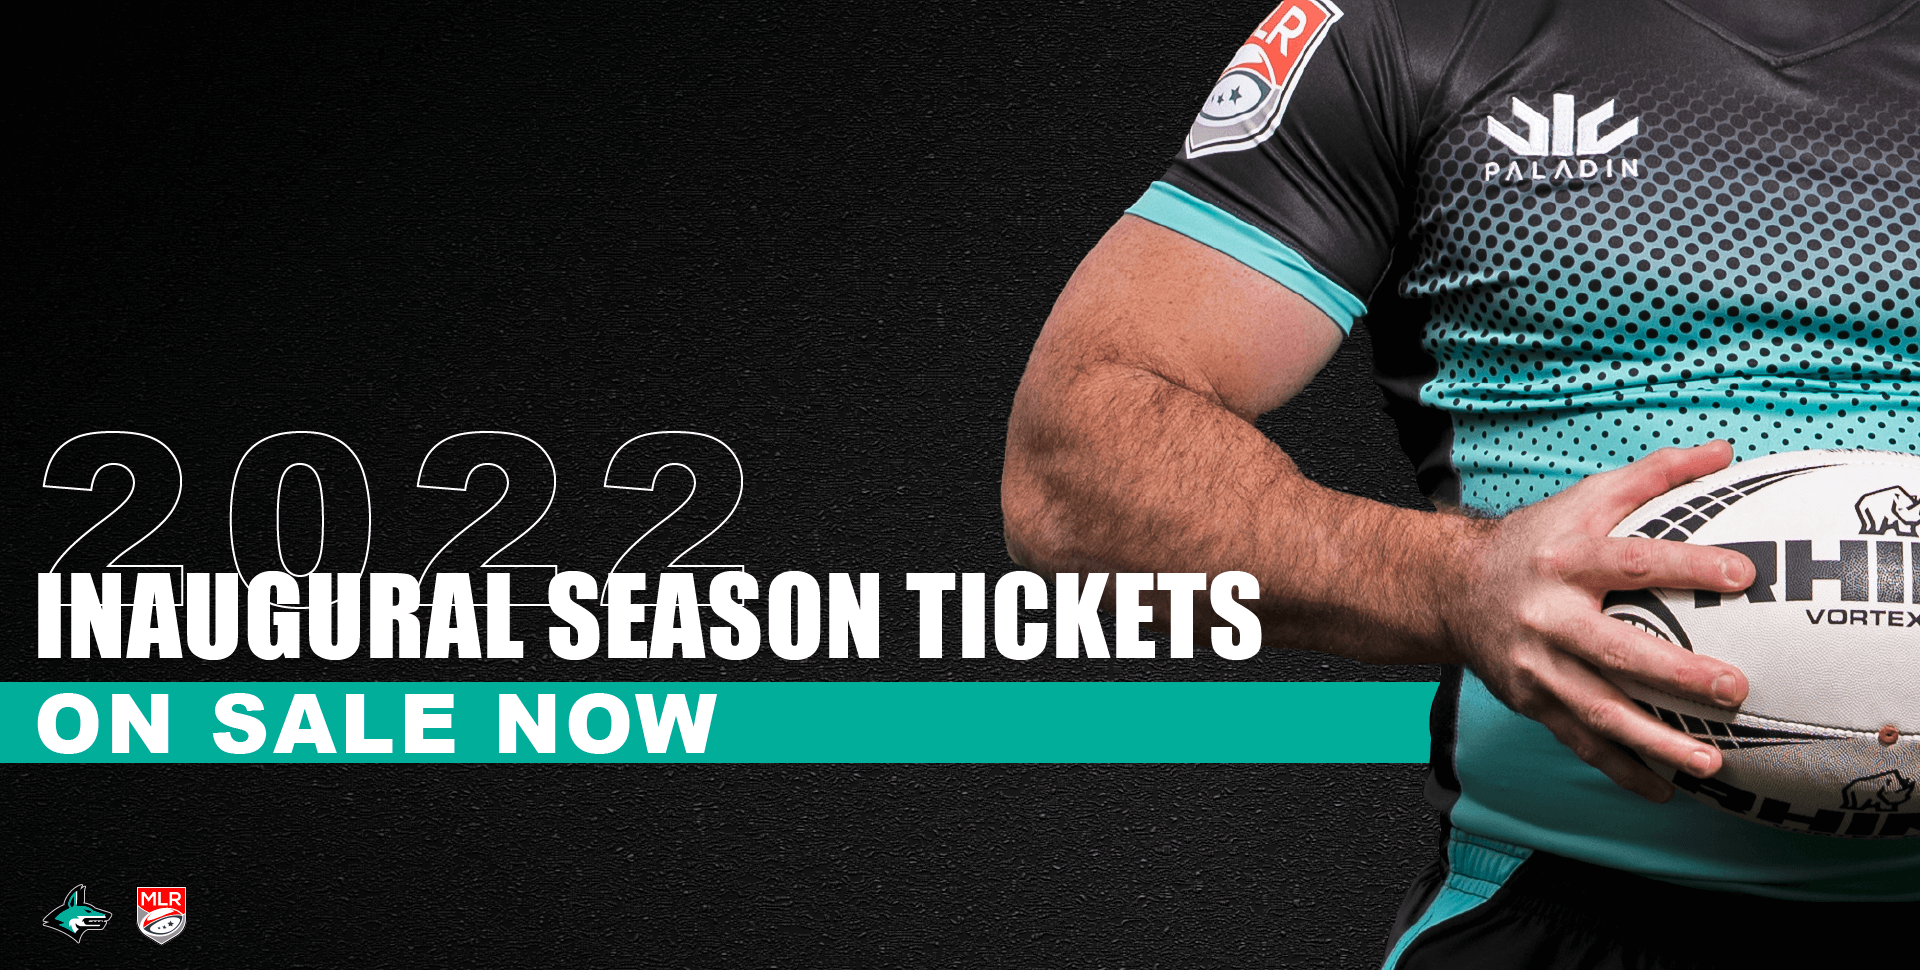 2022 Inaugural Season Tickets Available Now